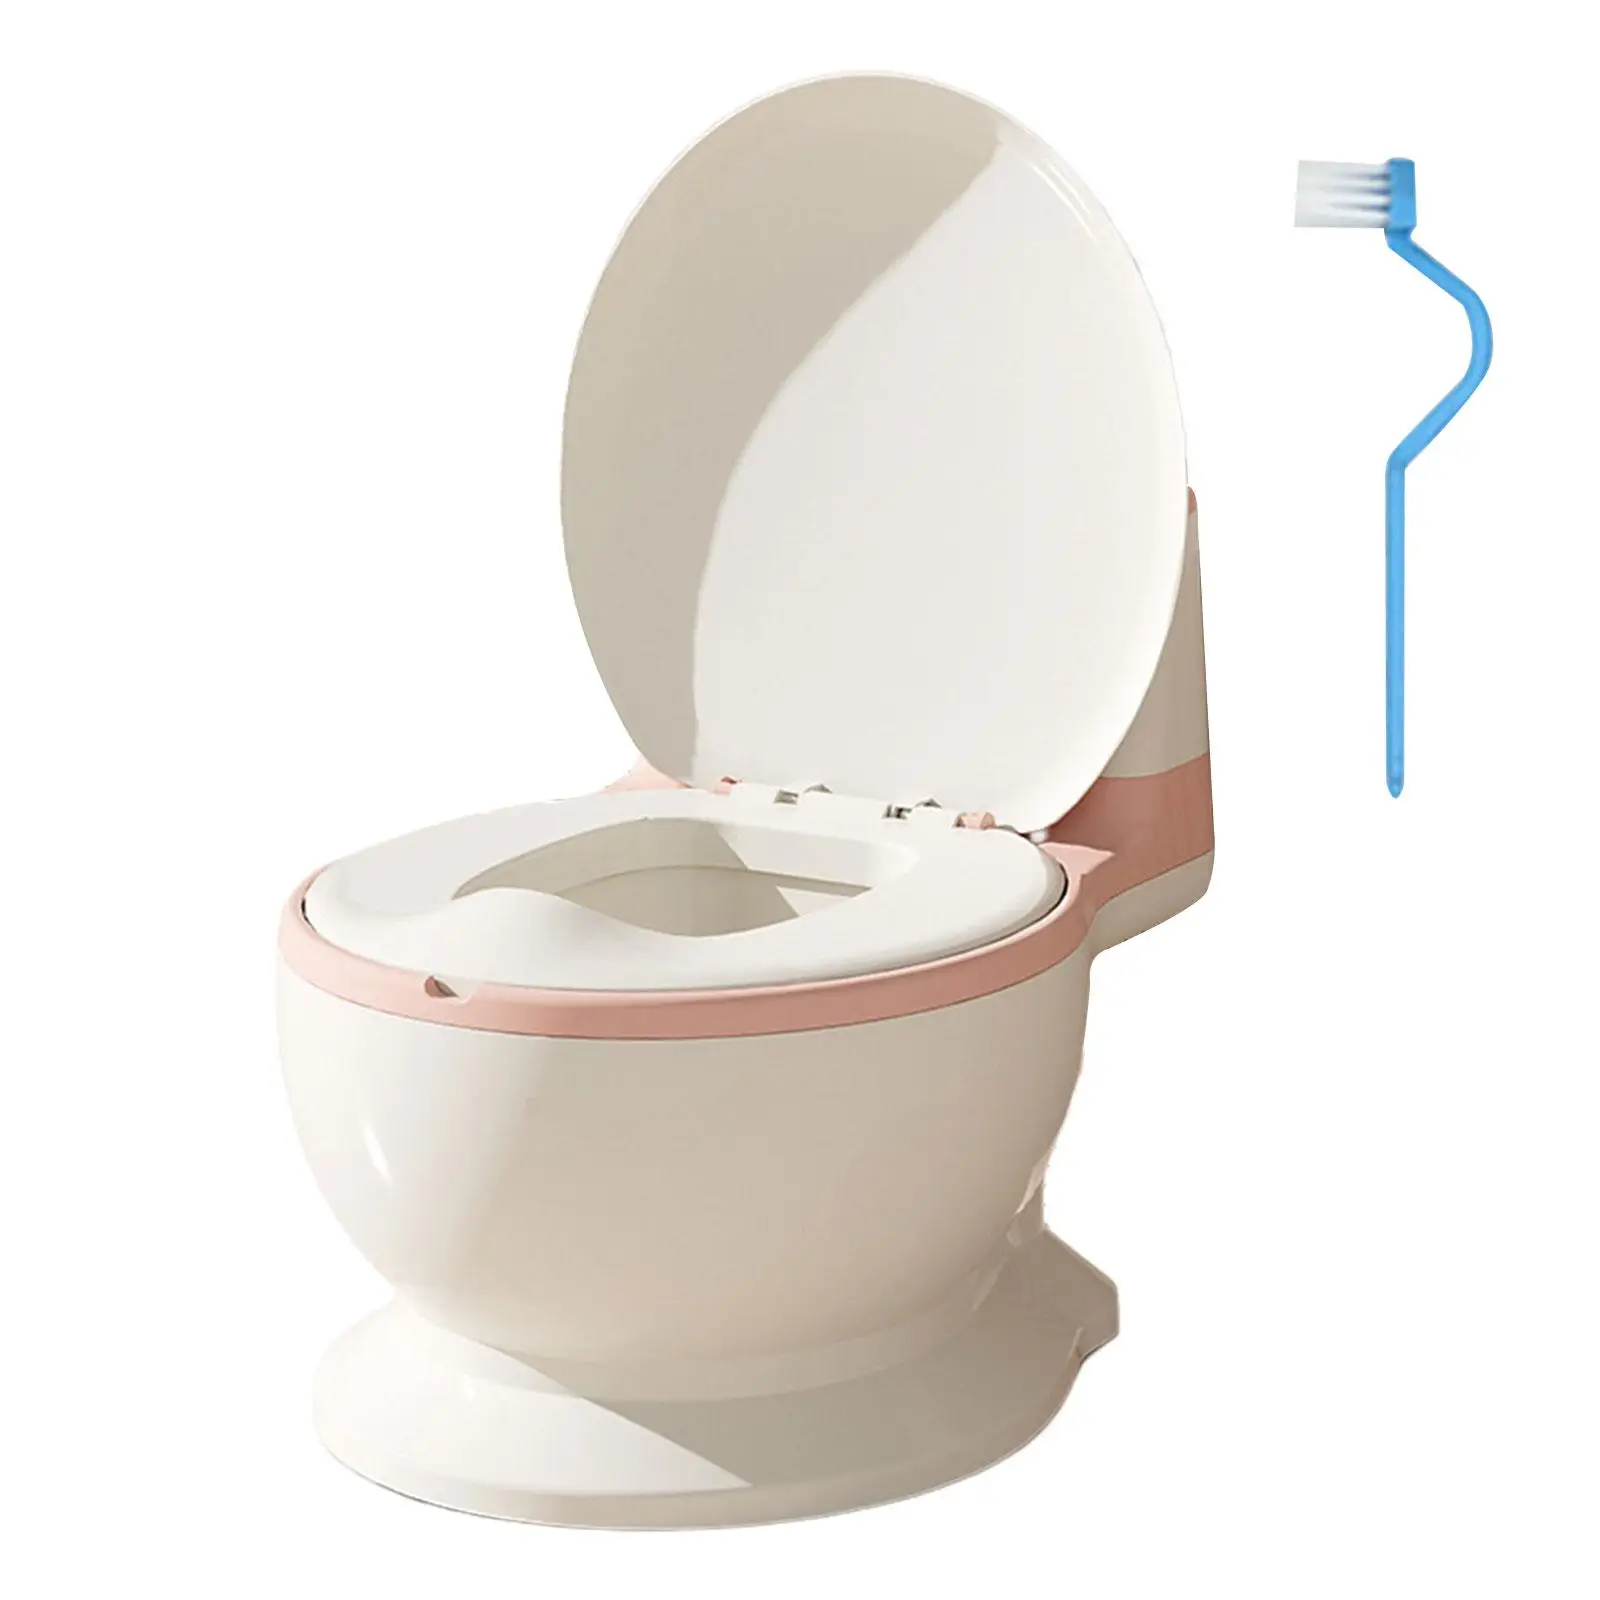 Baby Potty Toilet Compact Size with Spilling Guard Infants Toilet Seat Realistic Toilet Potty Seat for Bedroom Girls Boys Babies